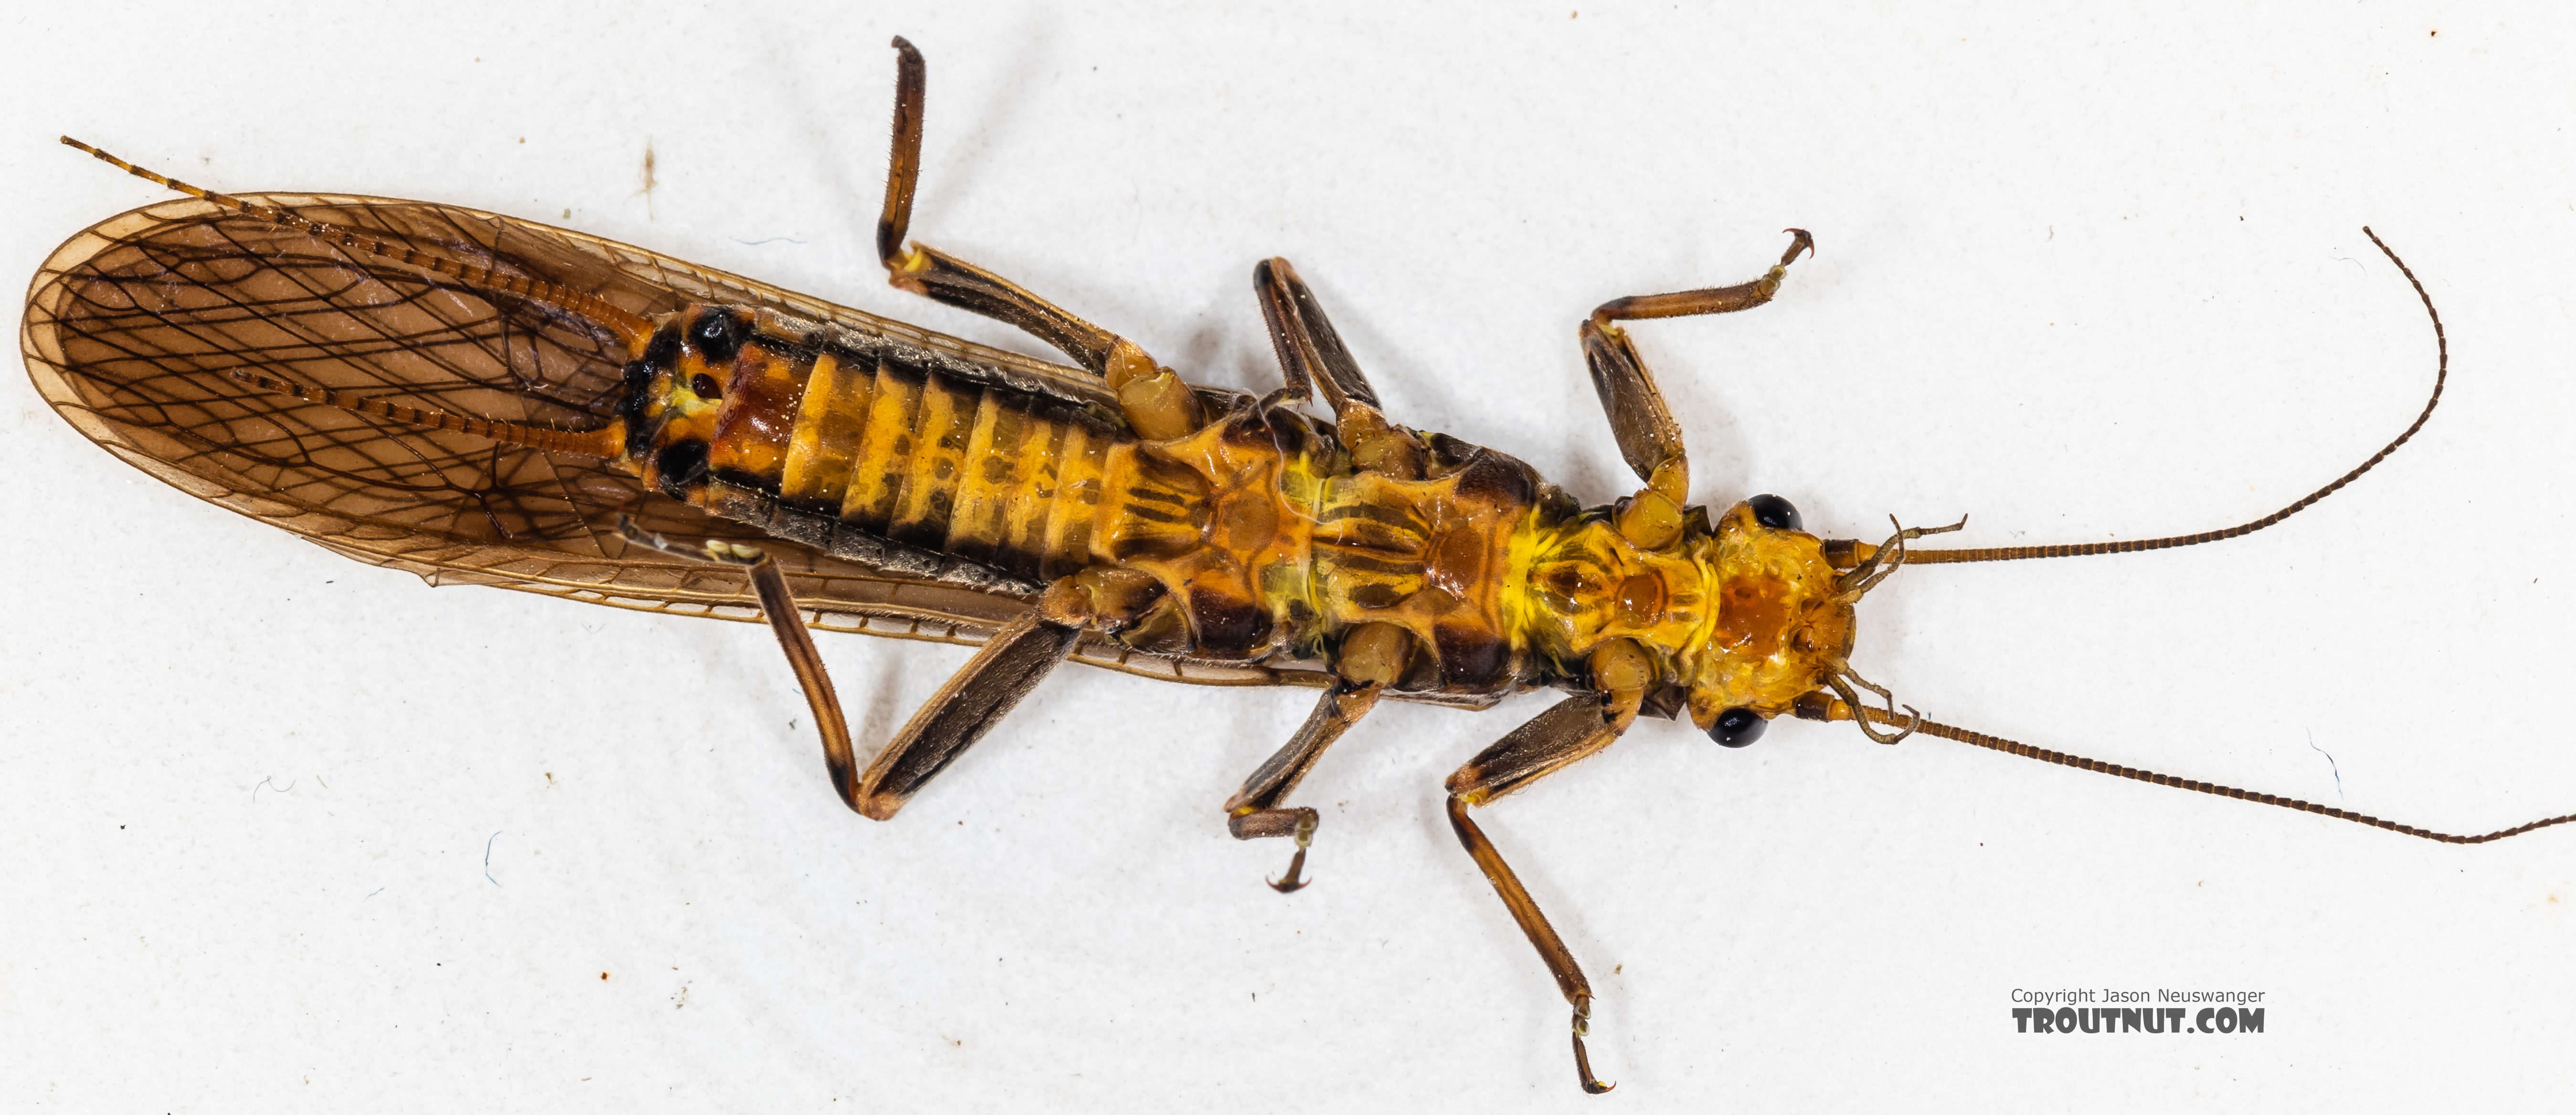 Male Calineuria californica (Golden Stone) Stonefly Adult from the South Fork Snoqualmie River in Washington